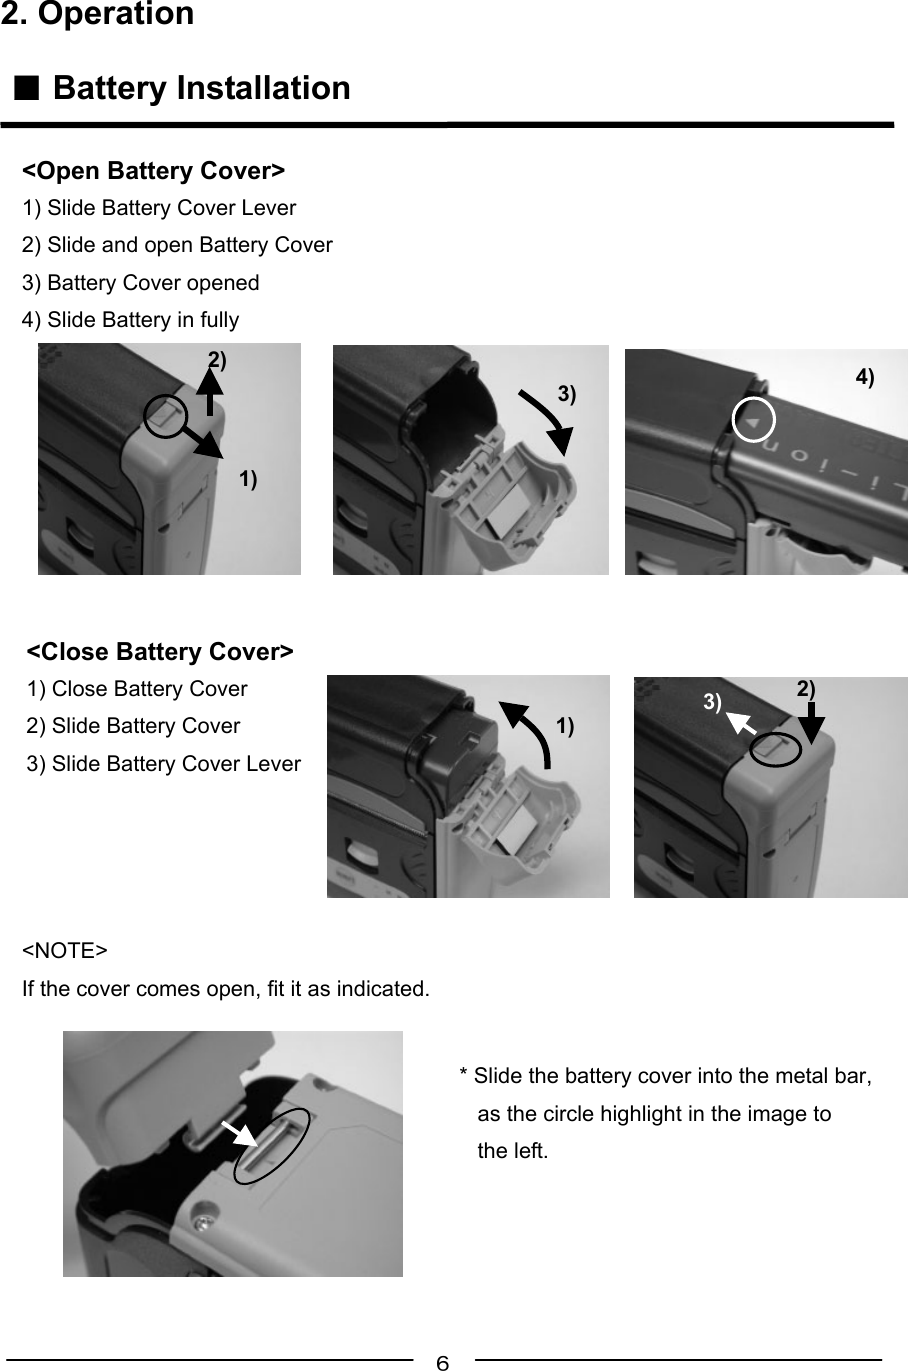 ６2. Operation ■ Battery Installation&lt;Close Battery Cover&gt;1) Close Battery Cover2) Slide Battery Cover3) Slide Battery Cover Lever&lt;NOTE&gt;If the cover comes open, fit it as indicated.* Slide the battery cover into the metal bar,   as the circle highlight in the image to   the left.  &lt;Open Battery Cover&gt;1) Slide Battery Cover Lever2) Slide and open Battery Cover3) Battery Cover opened4) Slide Battery in fully1)2)3) 4)1)2)3)